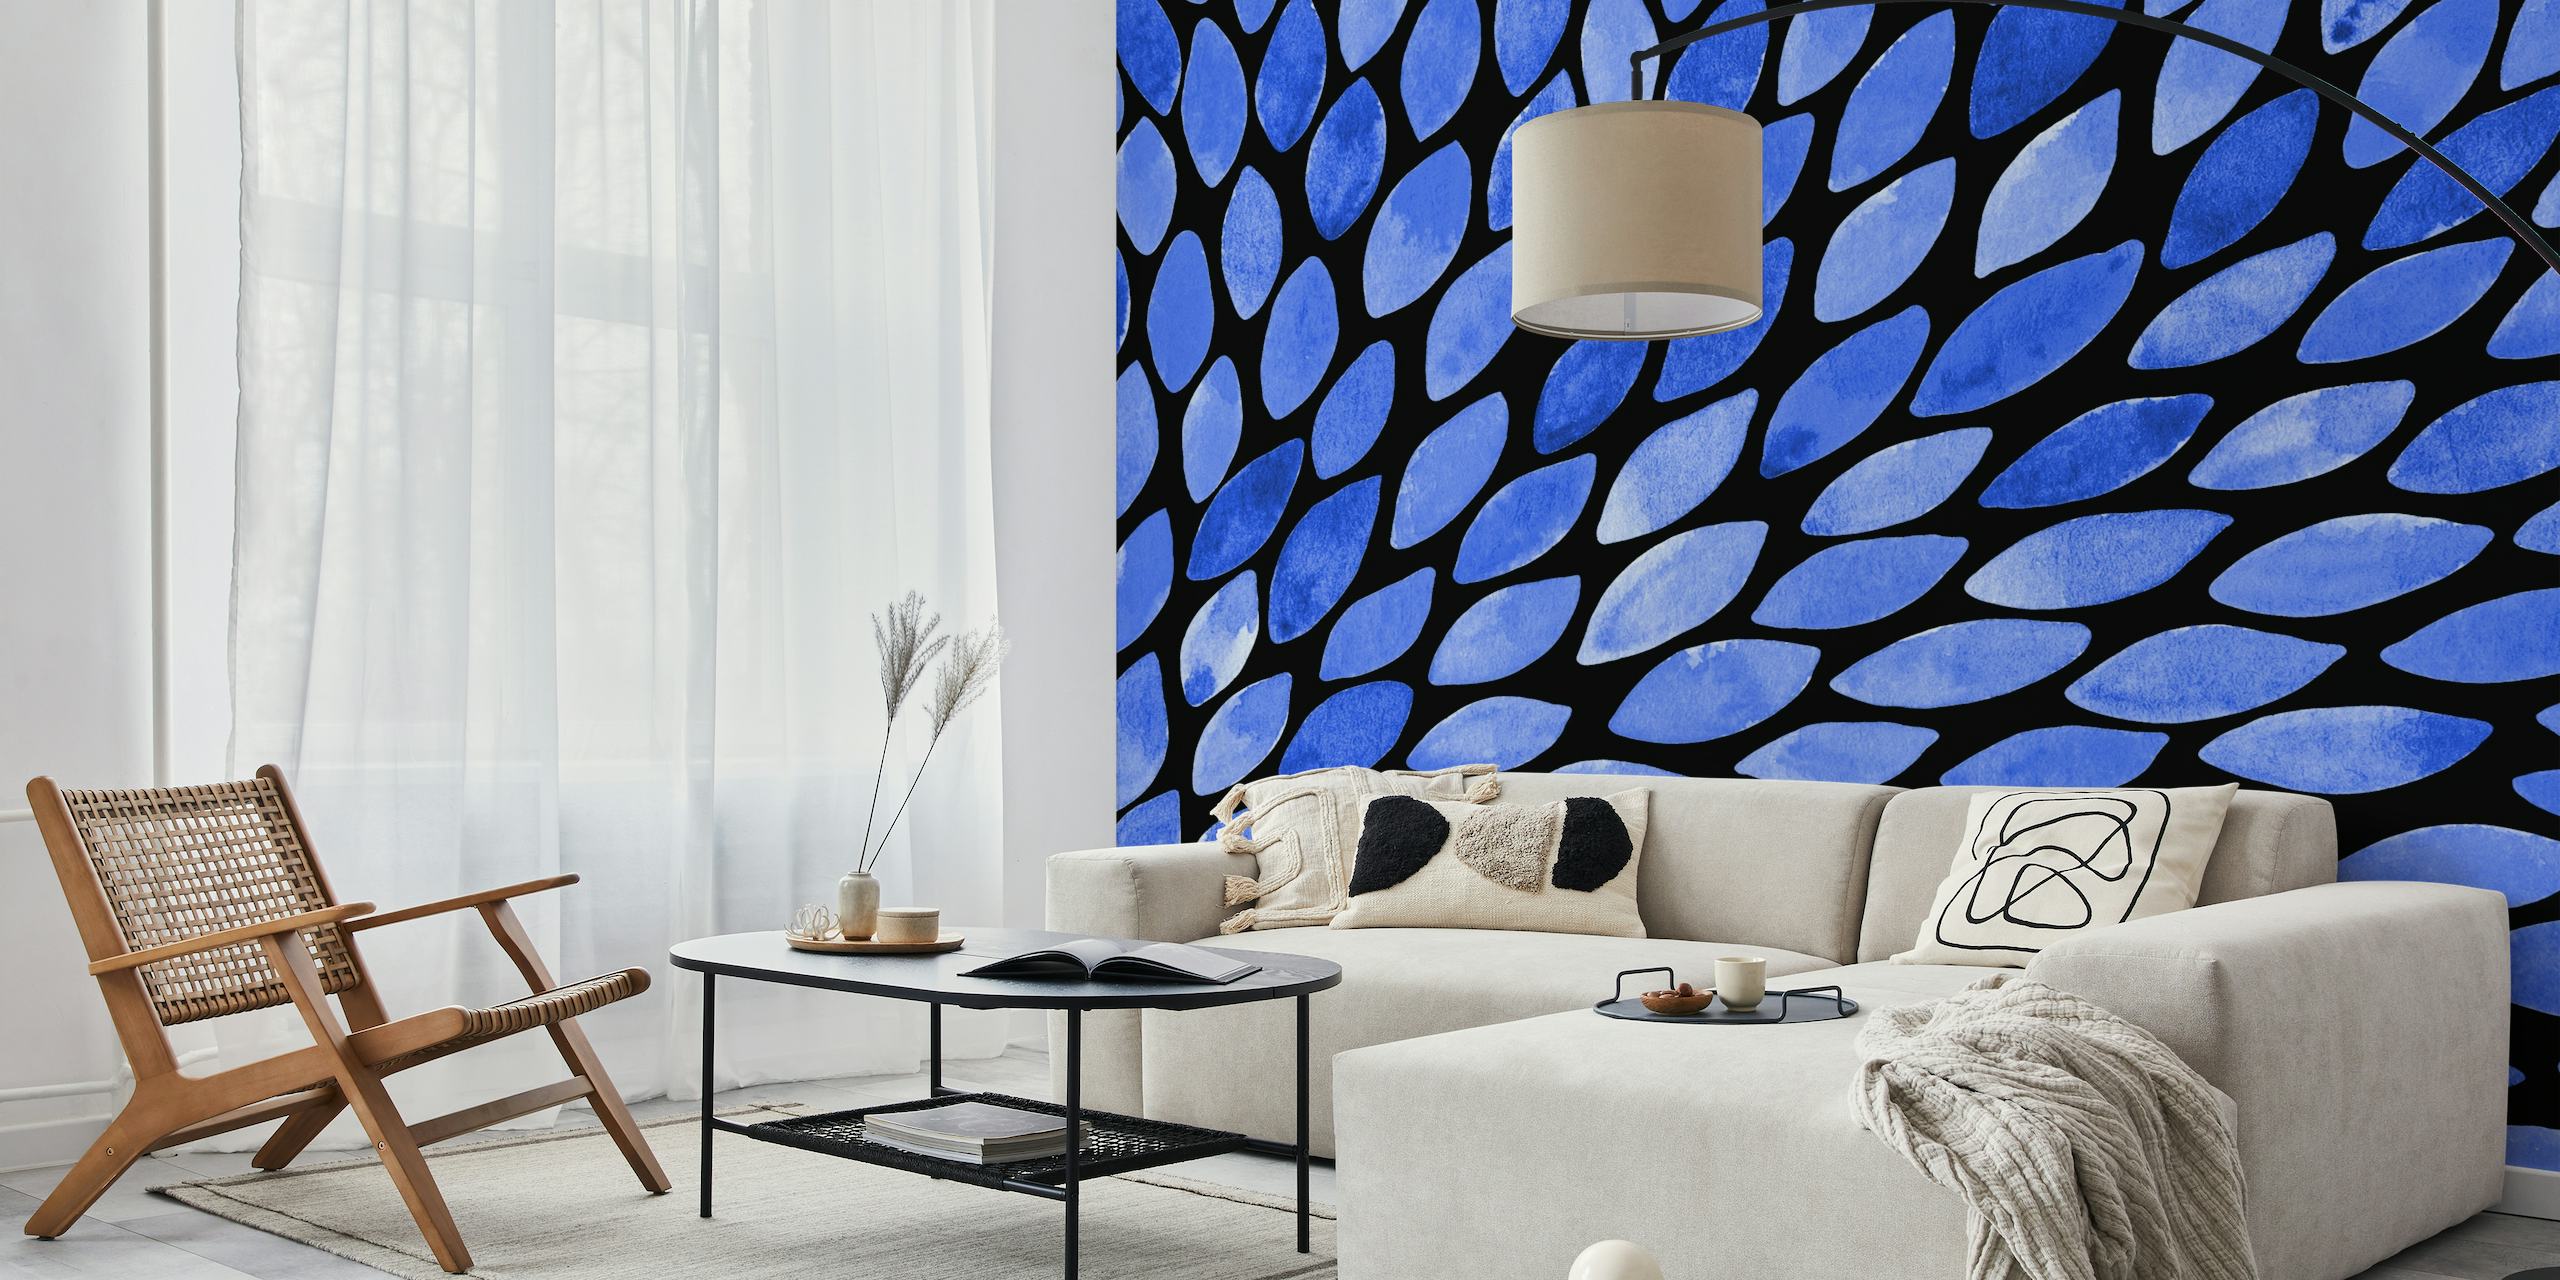 Electric blue watercolor pattern resembling an array of petals or feathers for a wall mural